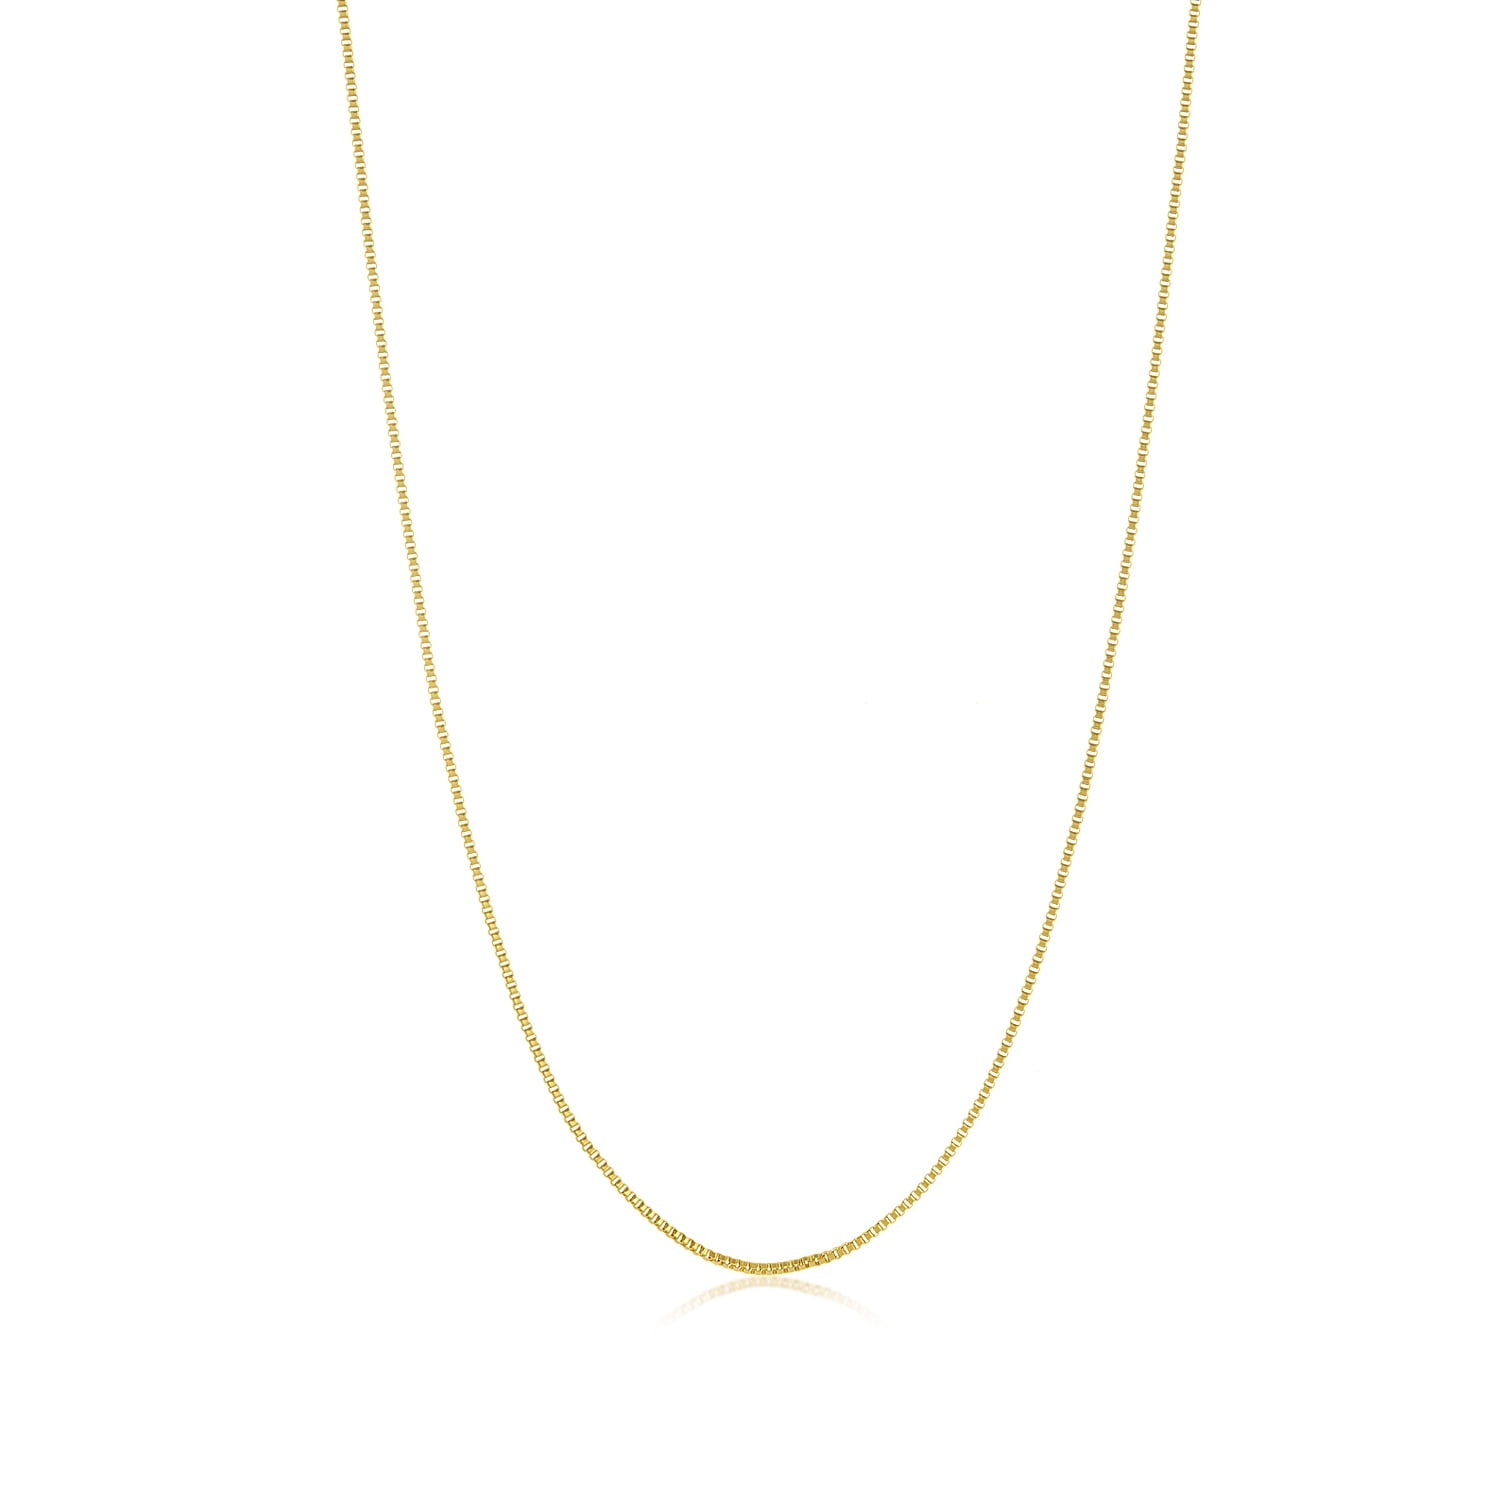 The Bling Factory Thin 1.6mm 14k Gold Plated Stainless Steel Box Chain w/Lobster Clasp 18 inches 